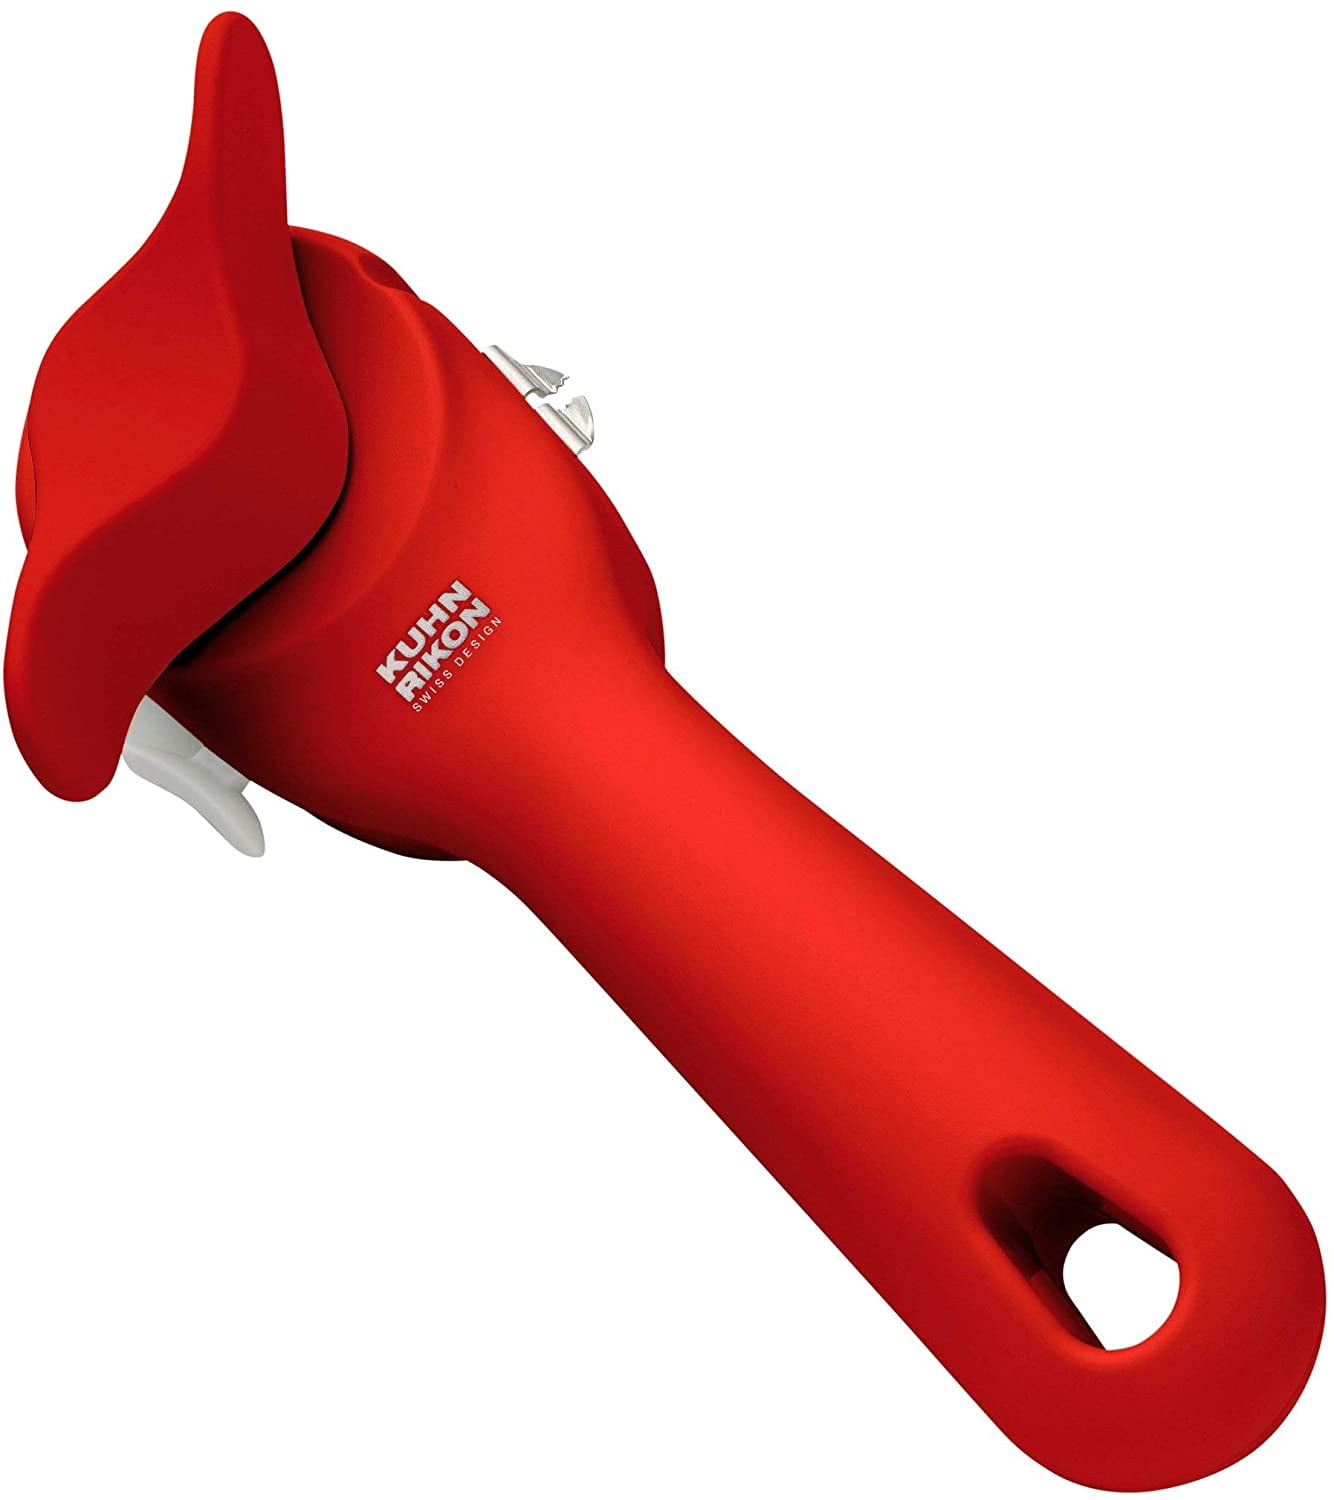 Zyliss ZYLISS Lock N Lift Manual Can Opener with Lid Lifter Magnet, Red